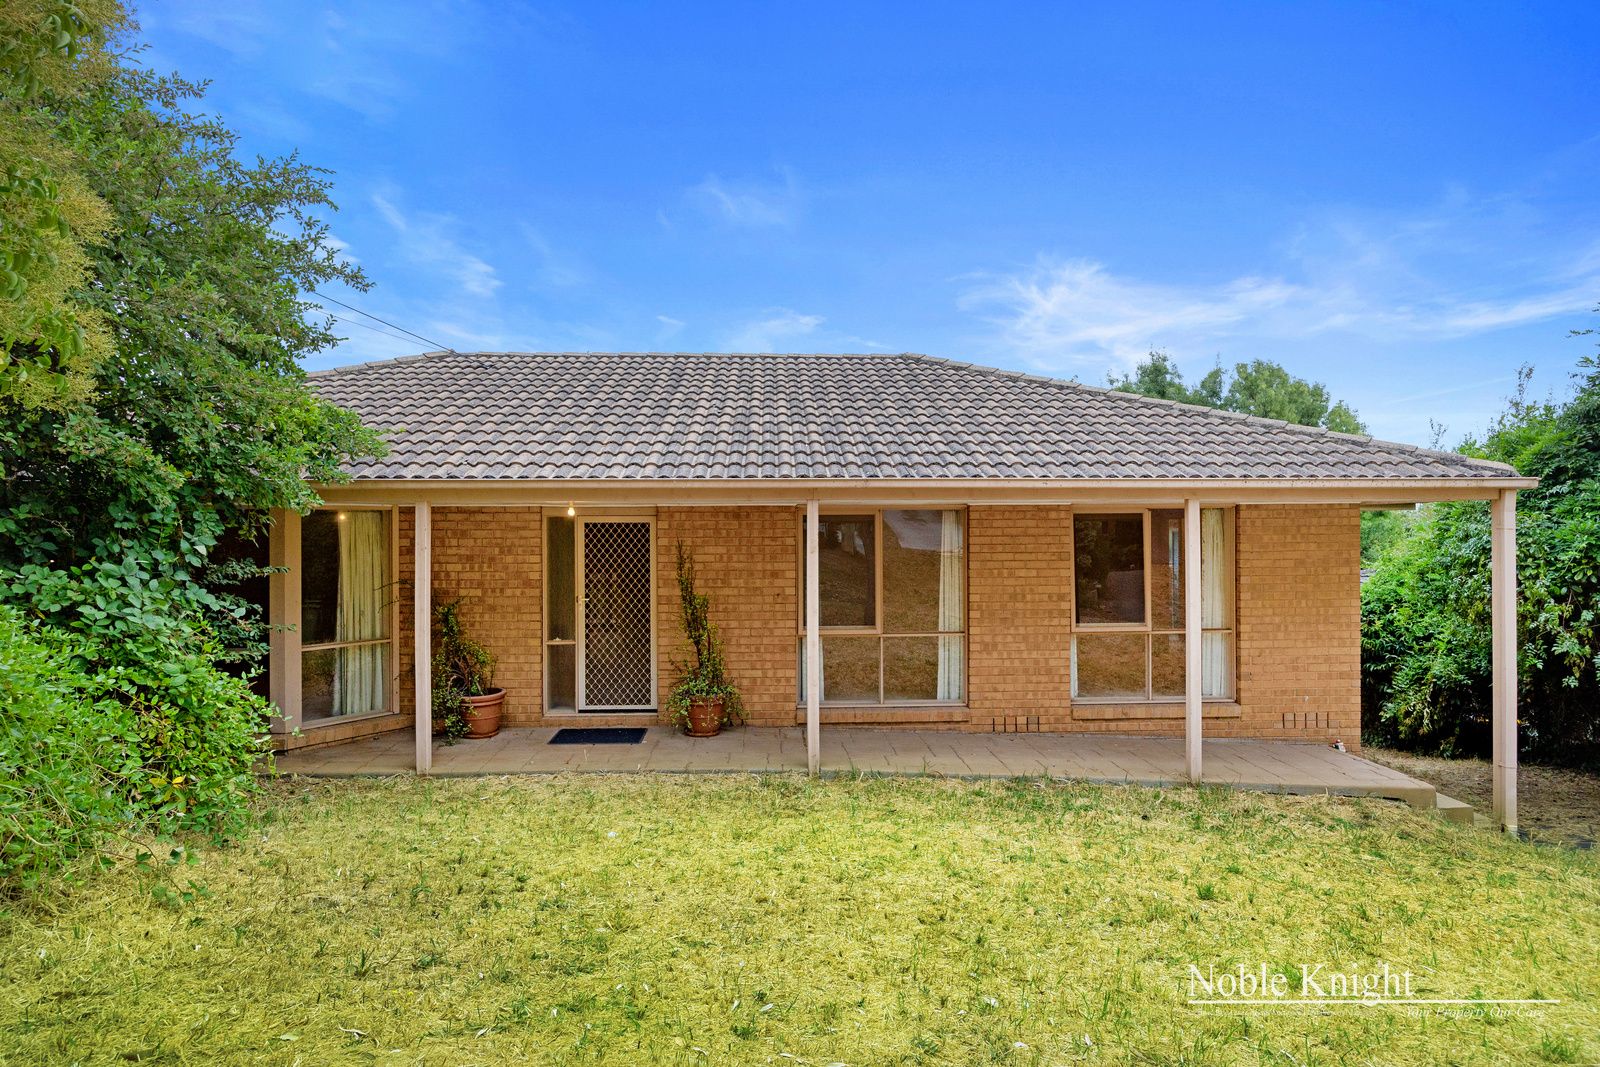 3 bedrooms House in 16 Summit Road LILYDALE VIC, 3140